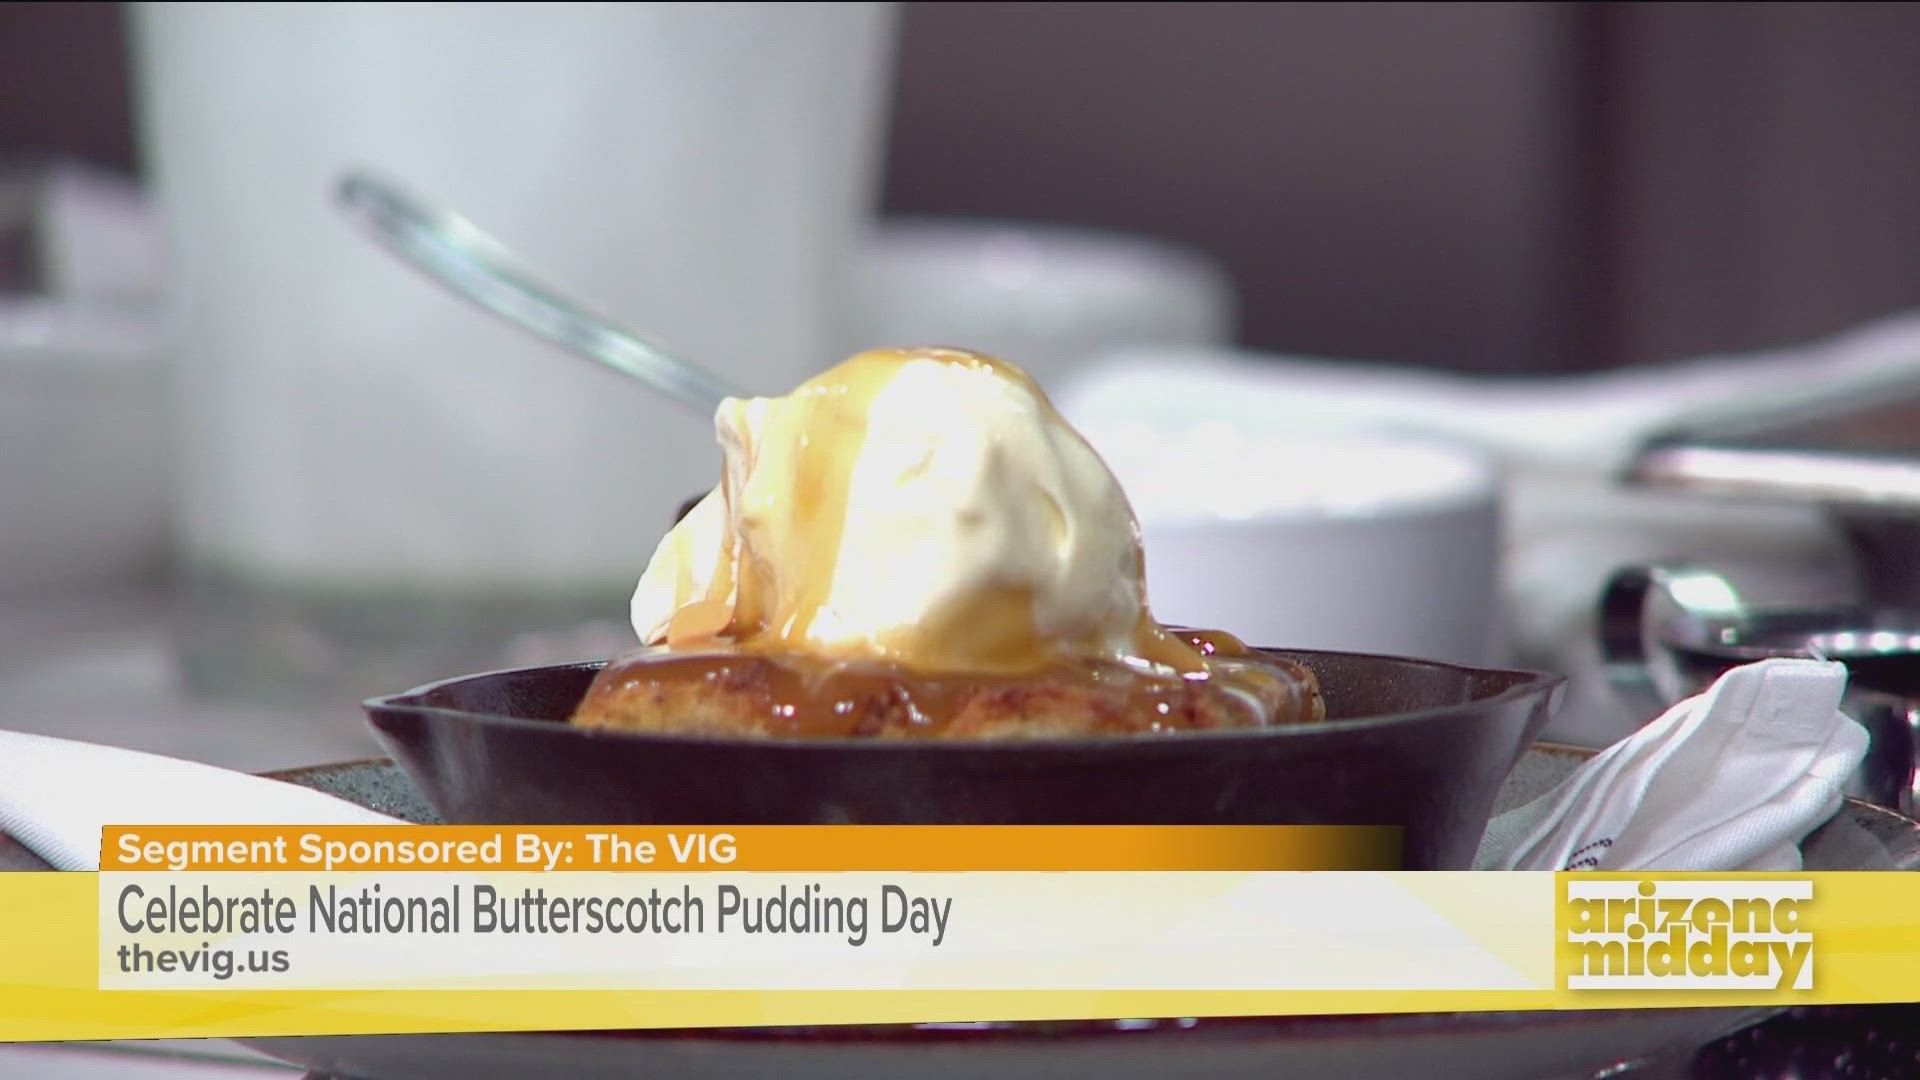 Jeremy Pacheco with The Vig stops by to show us how they make their delicious Butterscotch Bread Pudding.